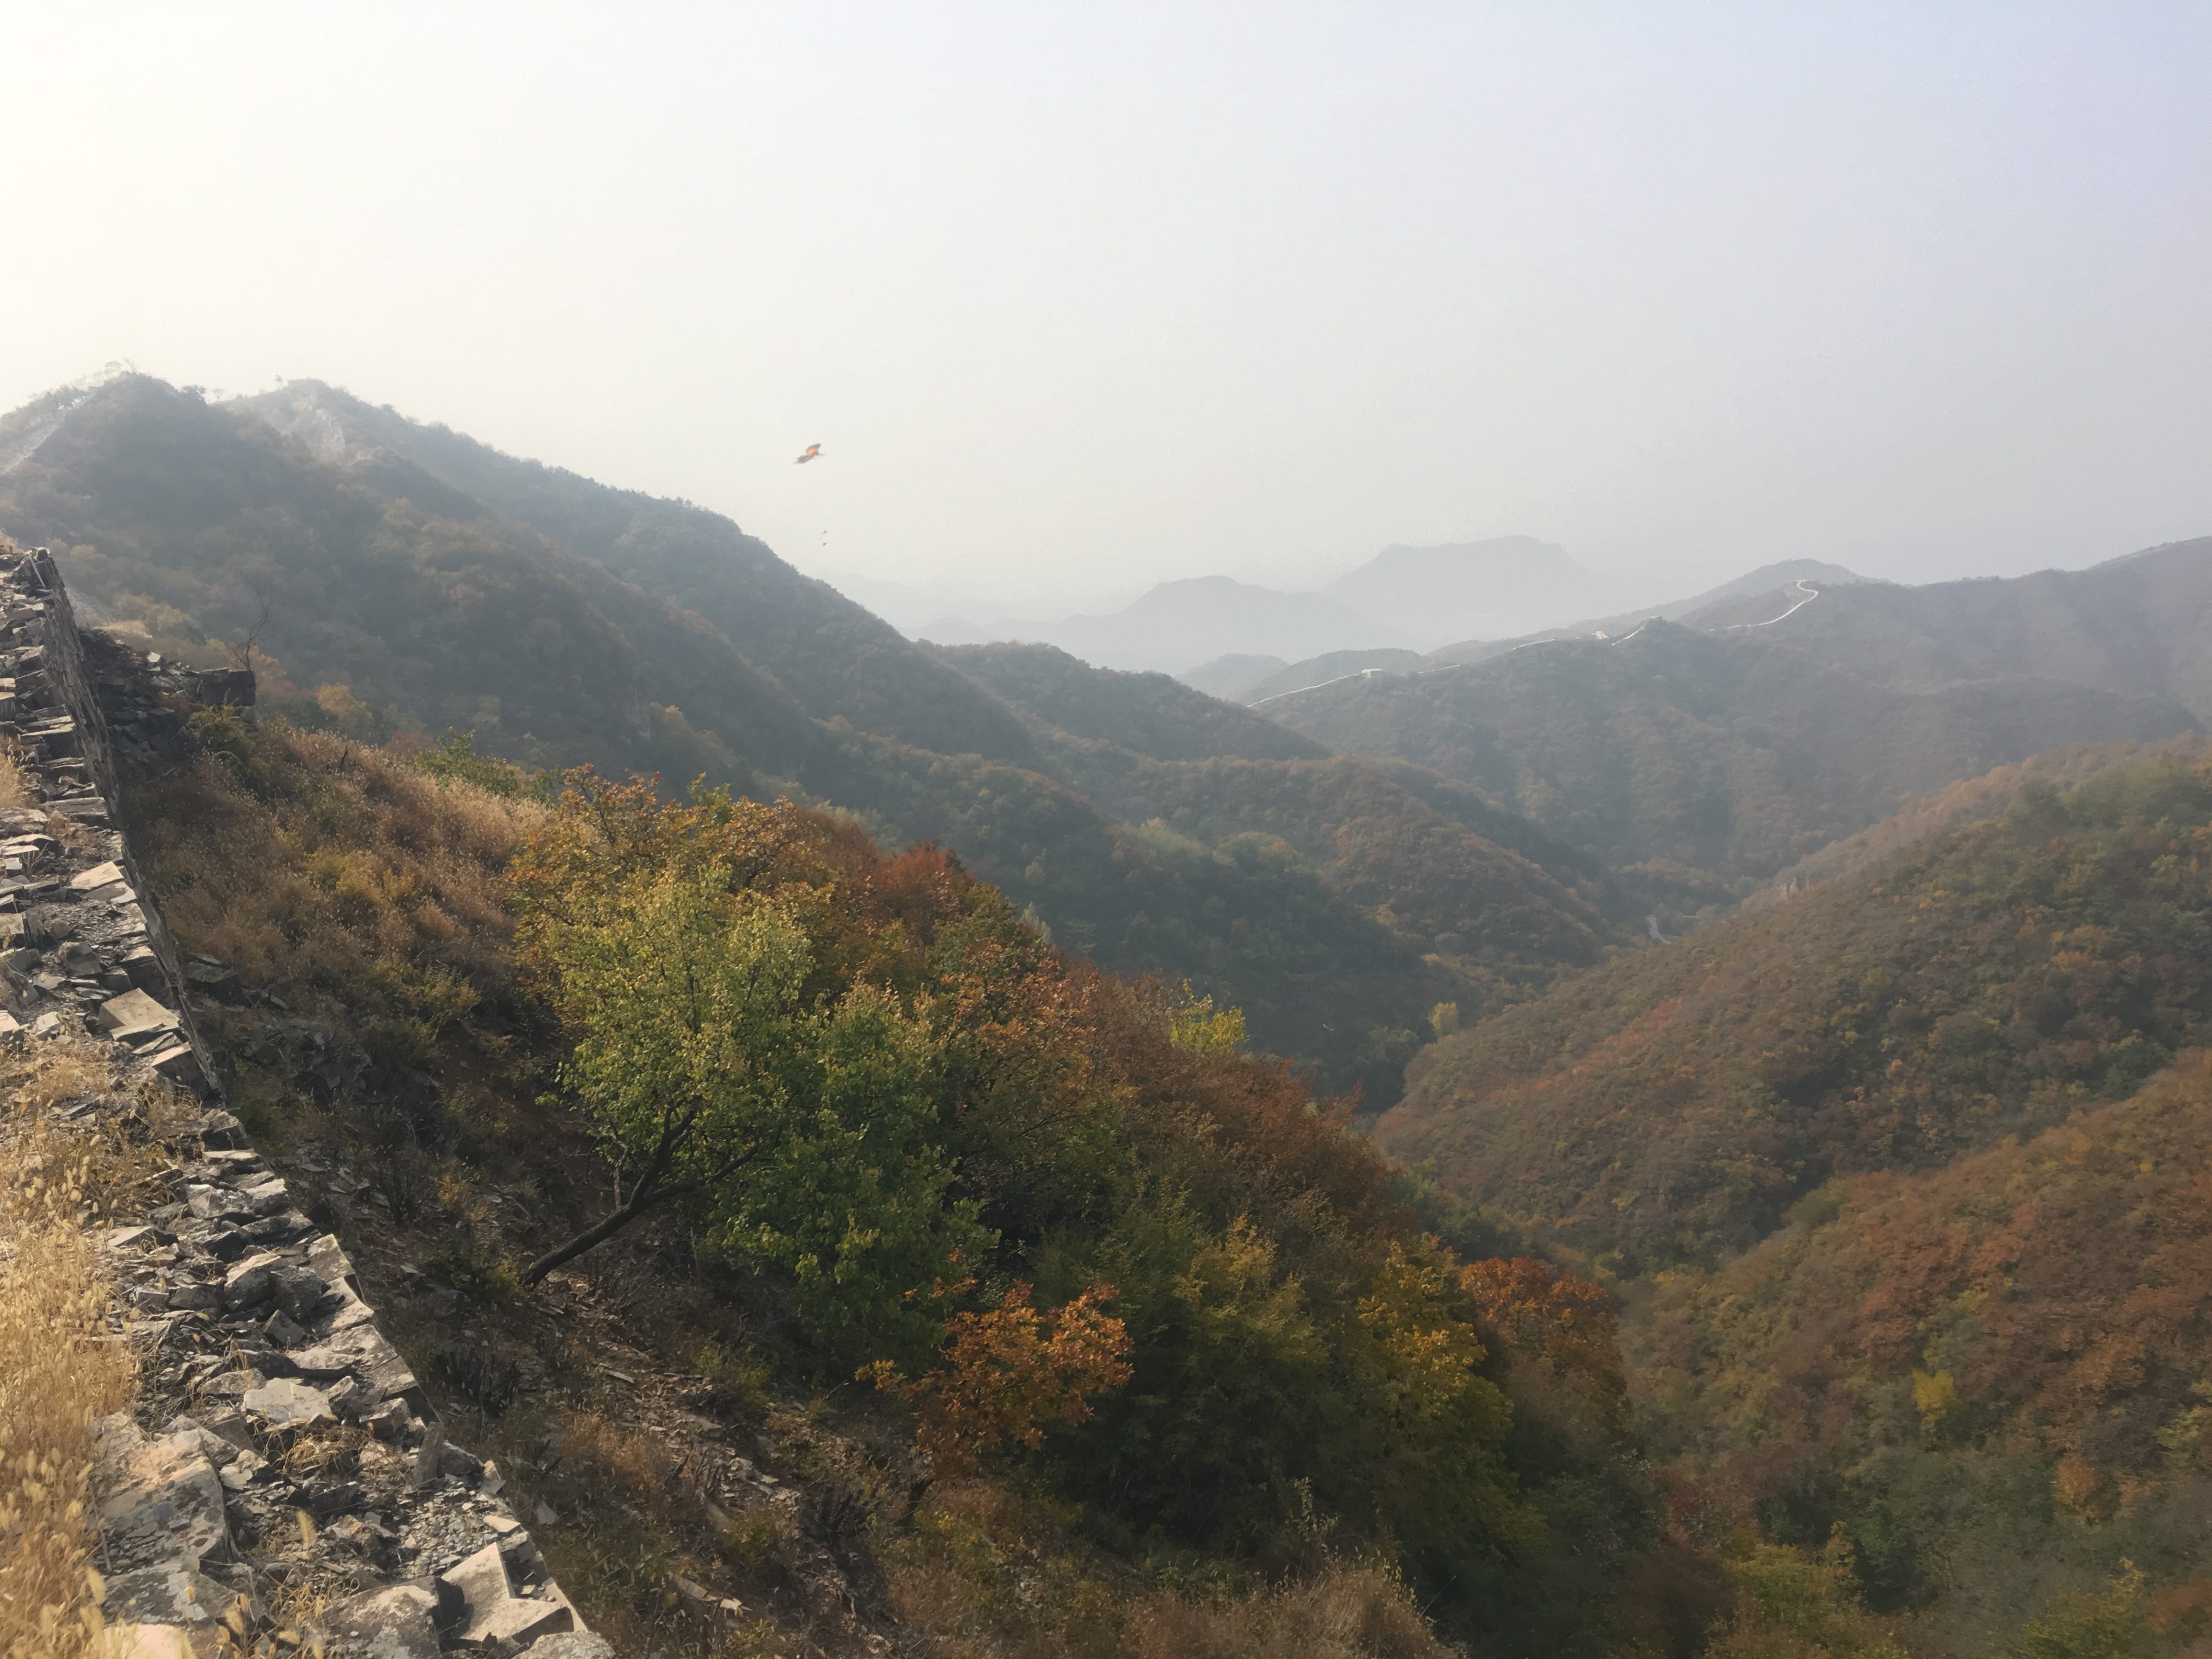 Looking over to more Great Wall and the surrounding mountains